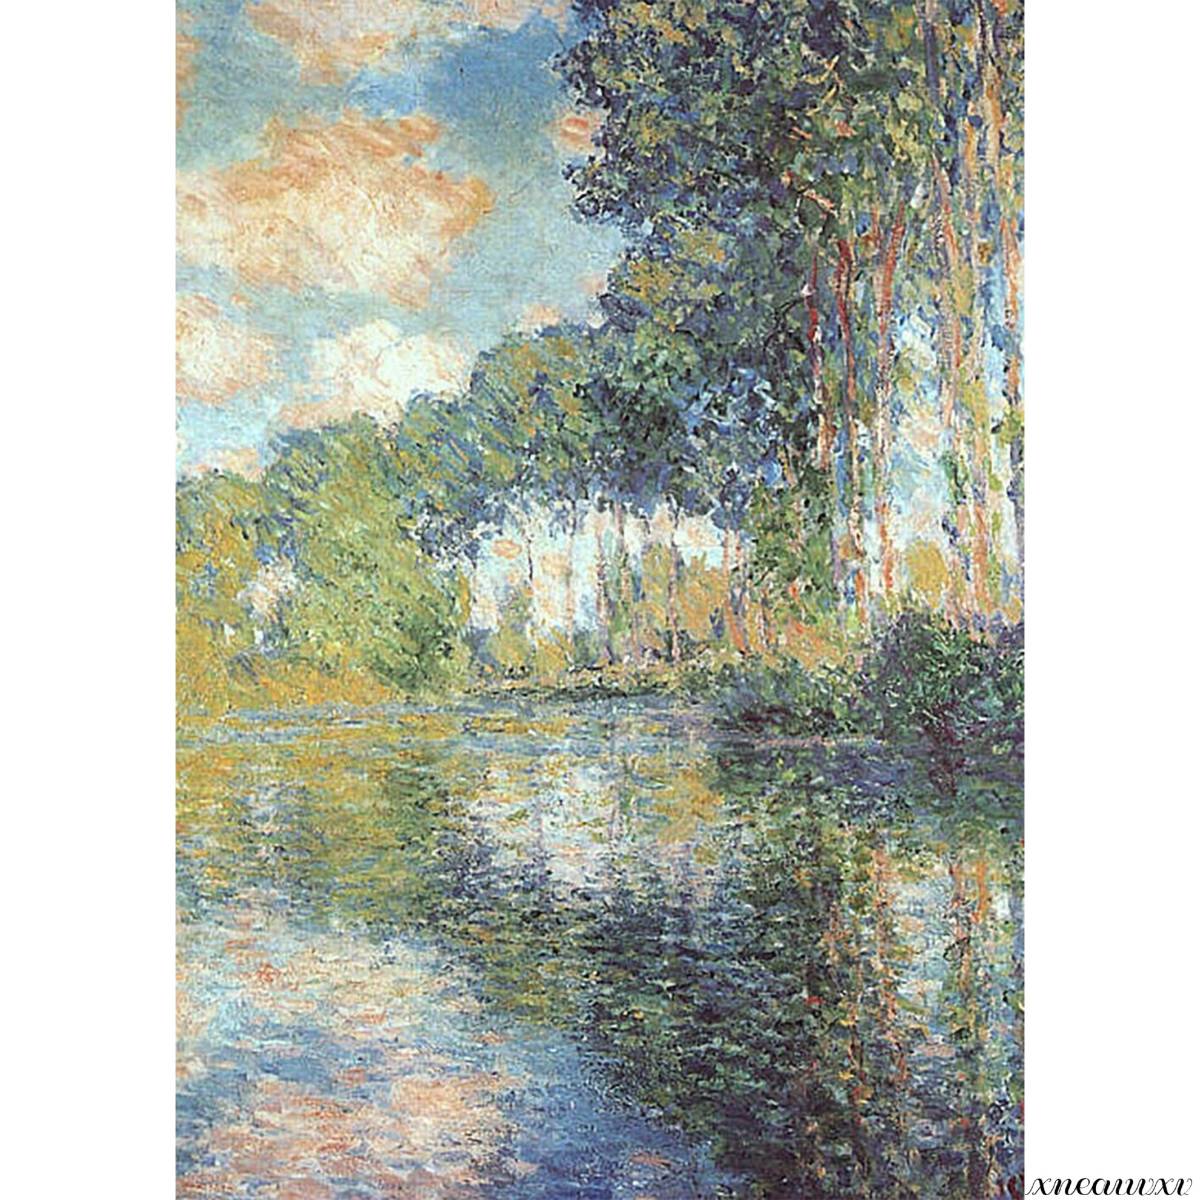 Monet landscape painting, made in Japan, A3 size, replica, oil painting, waterproof, interior, wall hanging, room decoration, decorative painting, art, poster, art, appreciation, Painting, Oil painting, Nature, Landscape painting